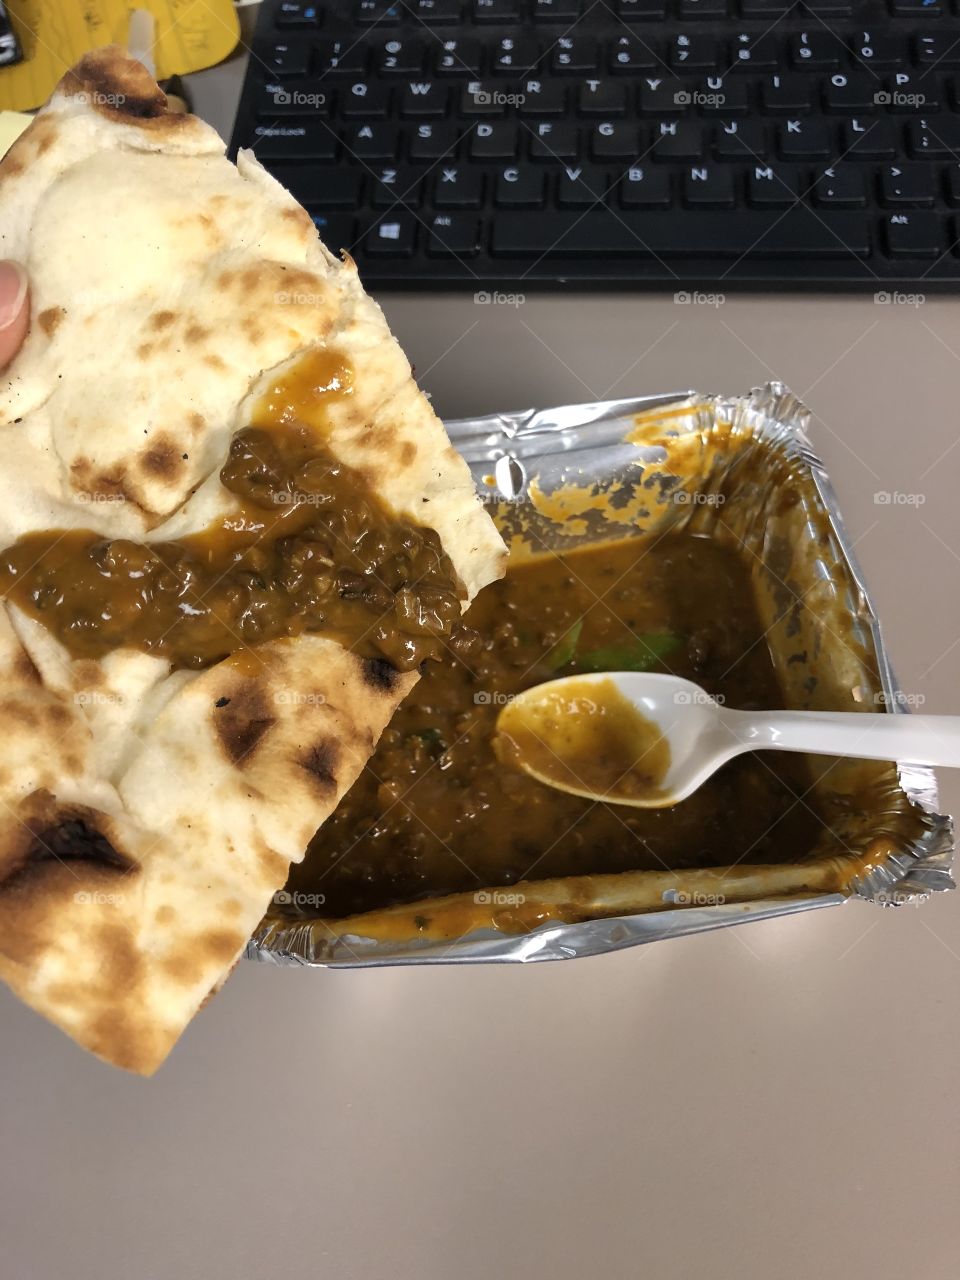 Some delicious daal and naan